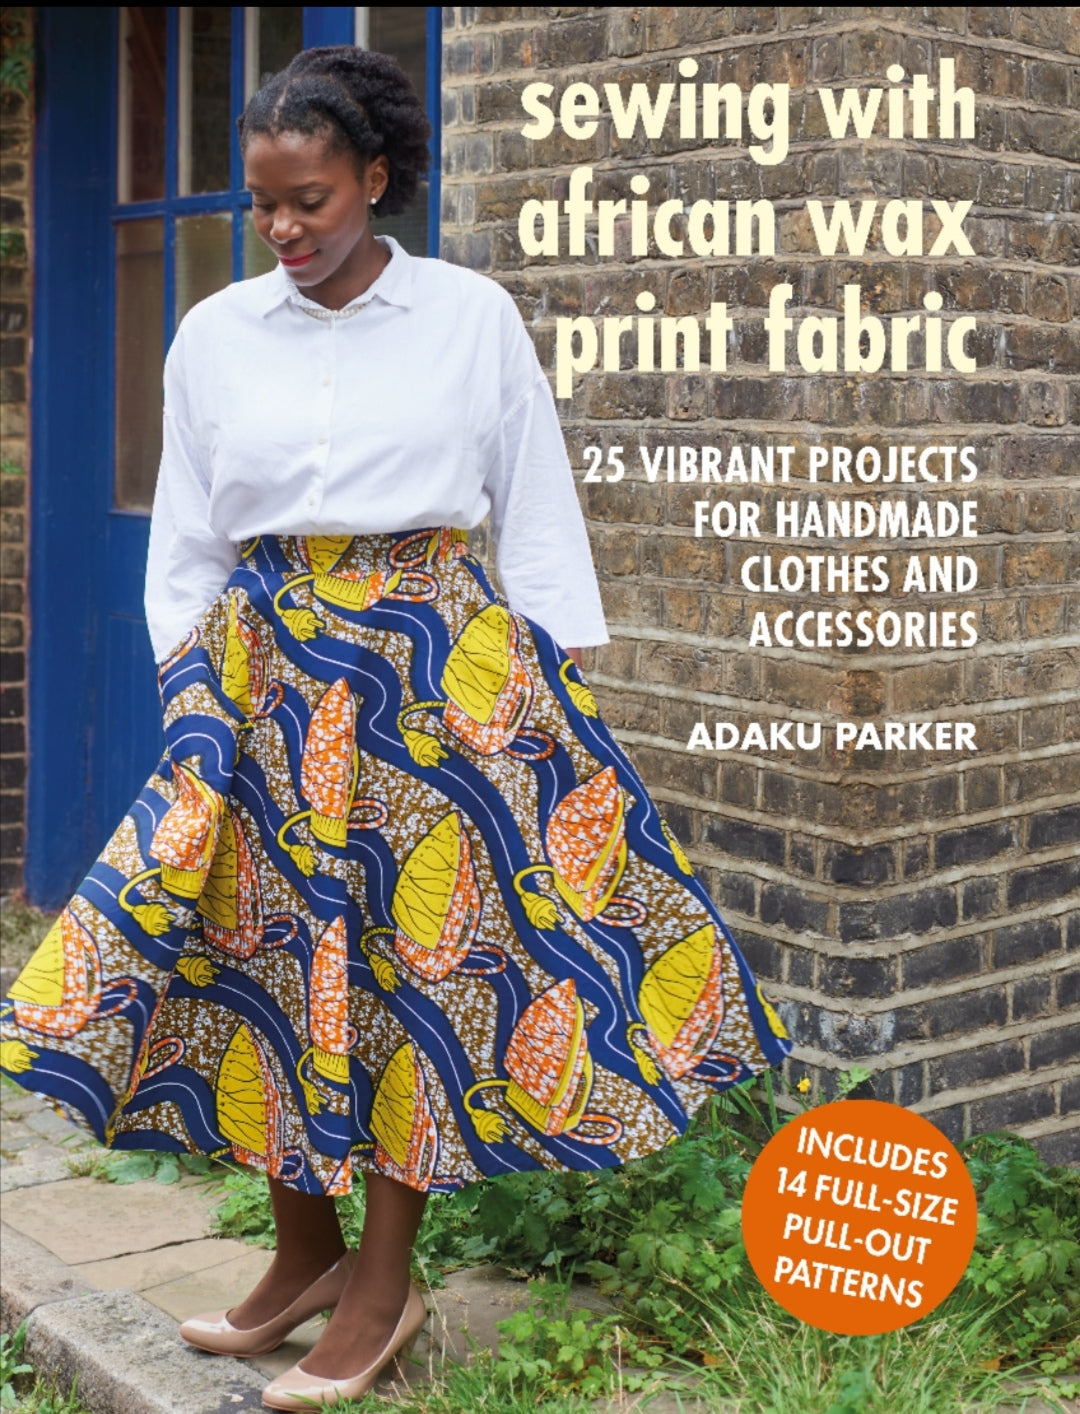 *NEW BOOK* 📖 Sewing with African wax print fabric 🎉 by Adaku Parker